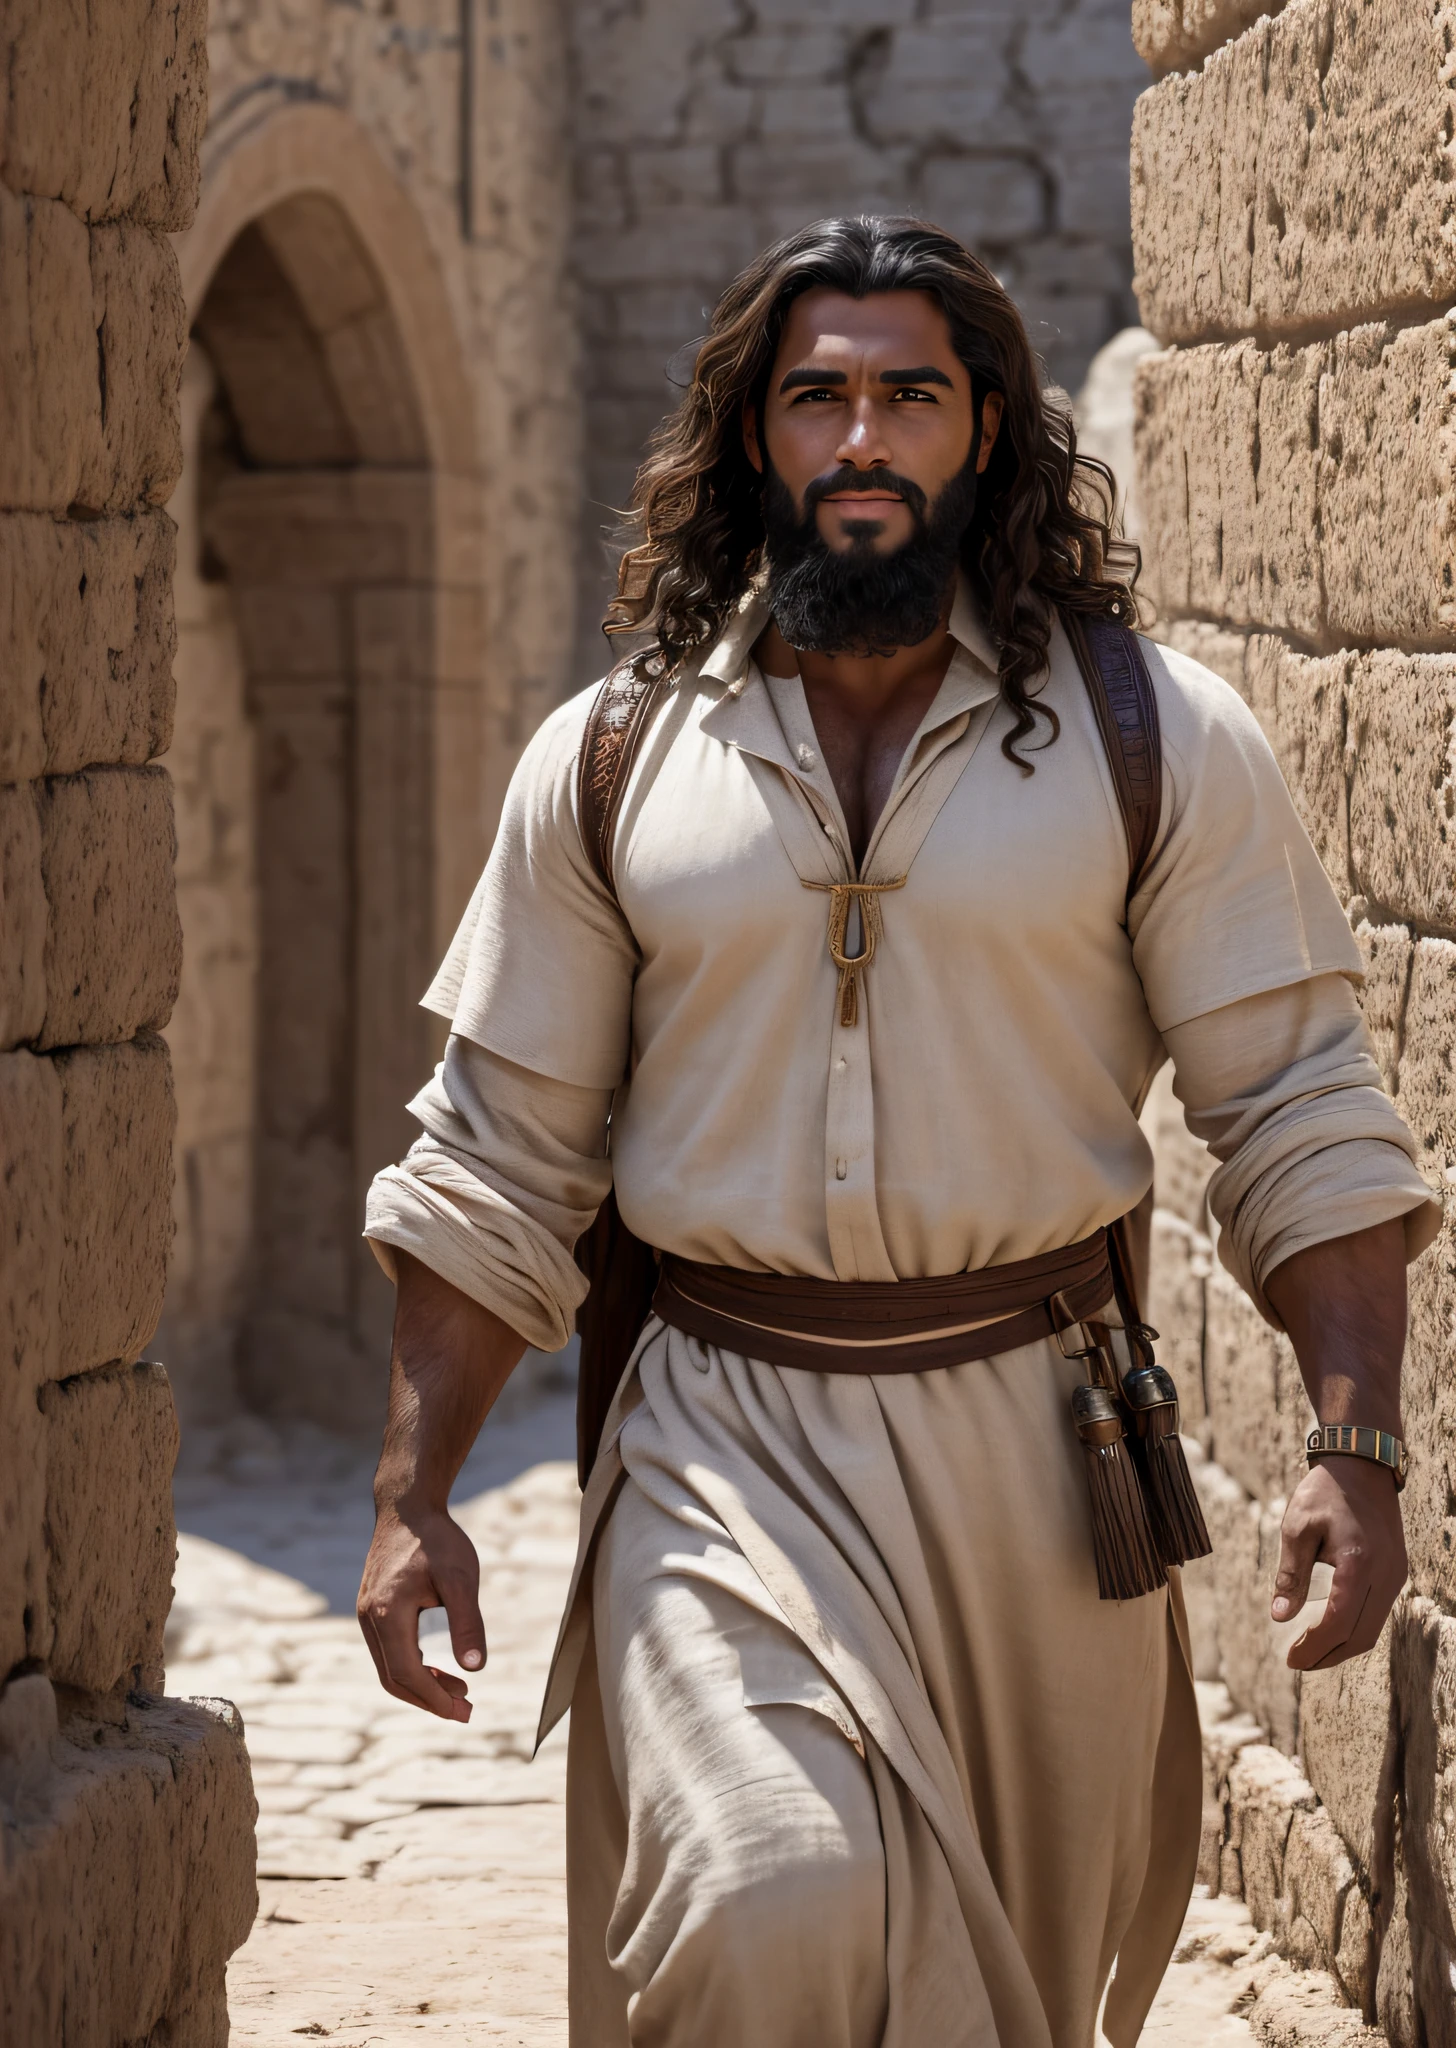 Masterpiece 8k, artistic reality, 8k wallpaper, historical Jesus, male carpenter, (highly tanned skin: 1.2), wavy shoulder-length hair, Palestinian, Jewish and Arabic features, brown eyes, smiling lips, long curly beard, wearing long loose linen simlah robes, usually ankle length 2000 years ago, sandals, in action walking through a barren ancient city, midday light, extremely handsome and strong man, very detailed, HDR, midjournei art, trending at artstation , trending at CGsociety, Fujichrome Provia 100F